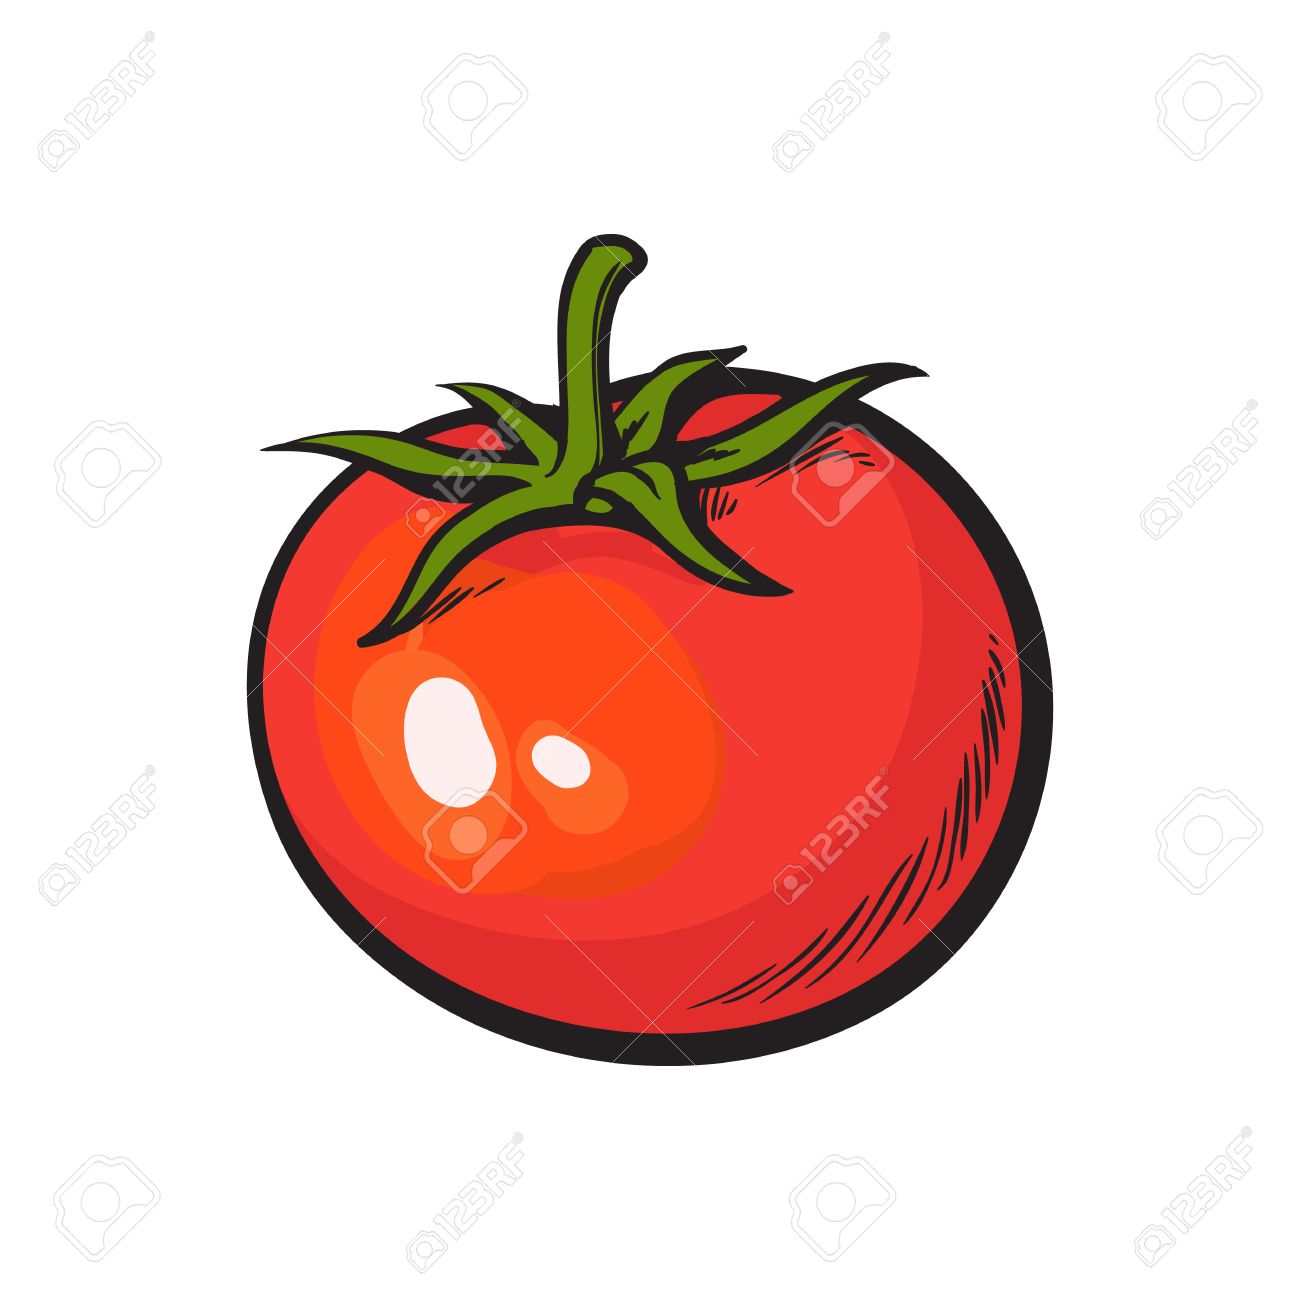 Gezocht grafisch ontwerper voor illustraties-64765596-sketch-style-drawing-shiny-ripe-red-tomato-vector-illustration-isolated-on-white-bac-jpg